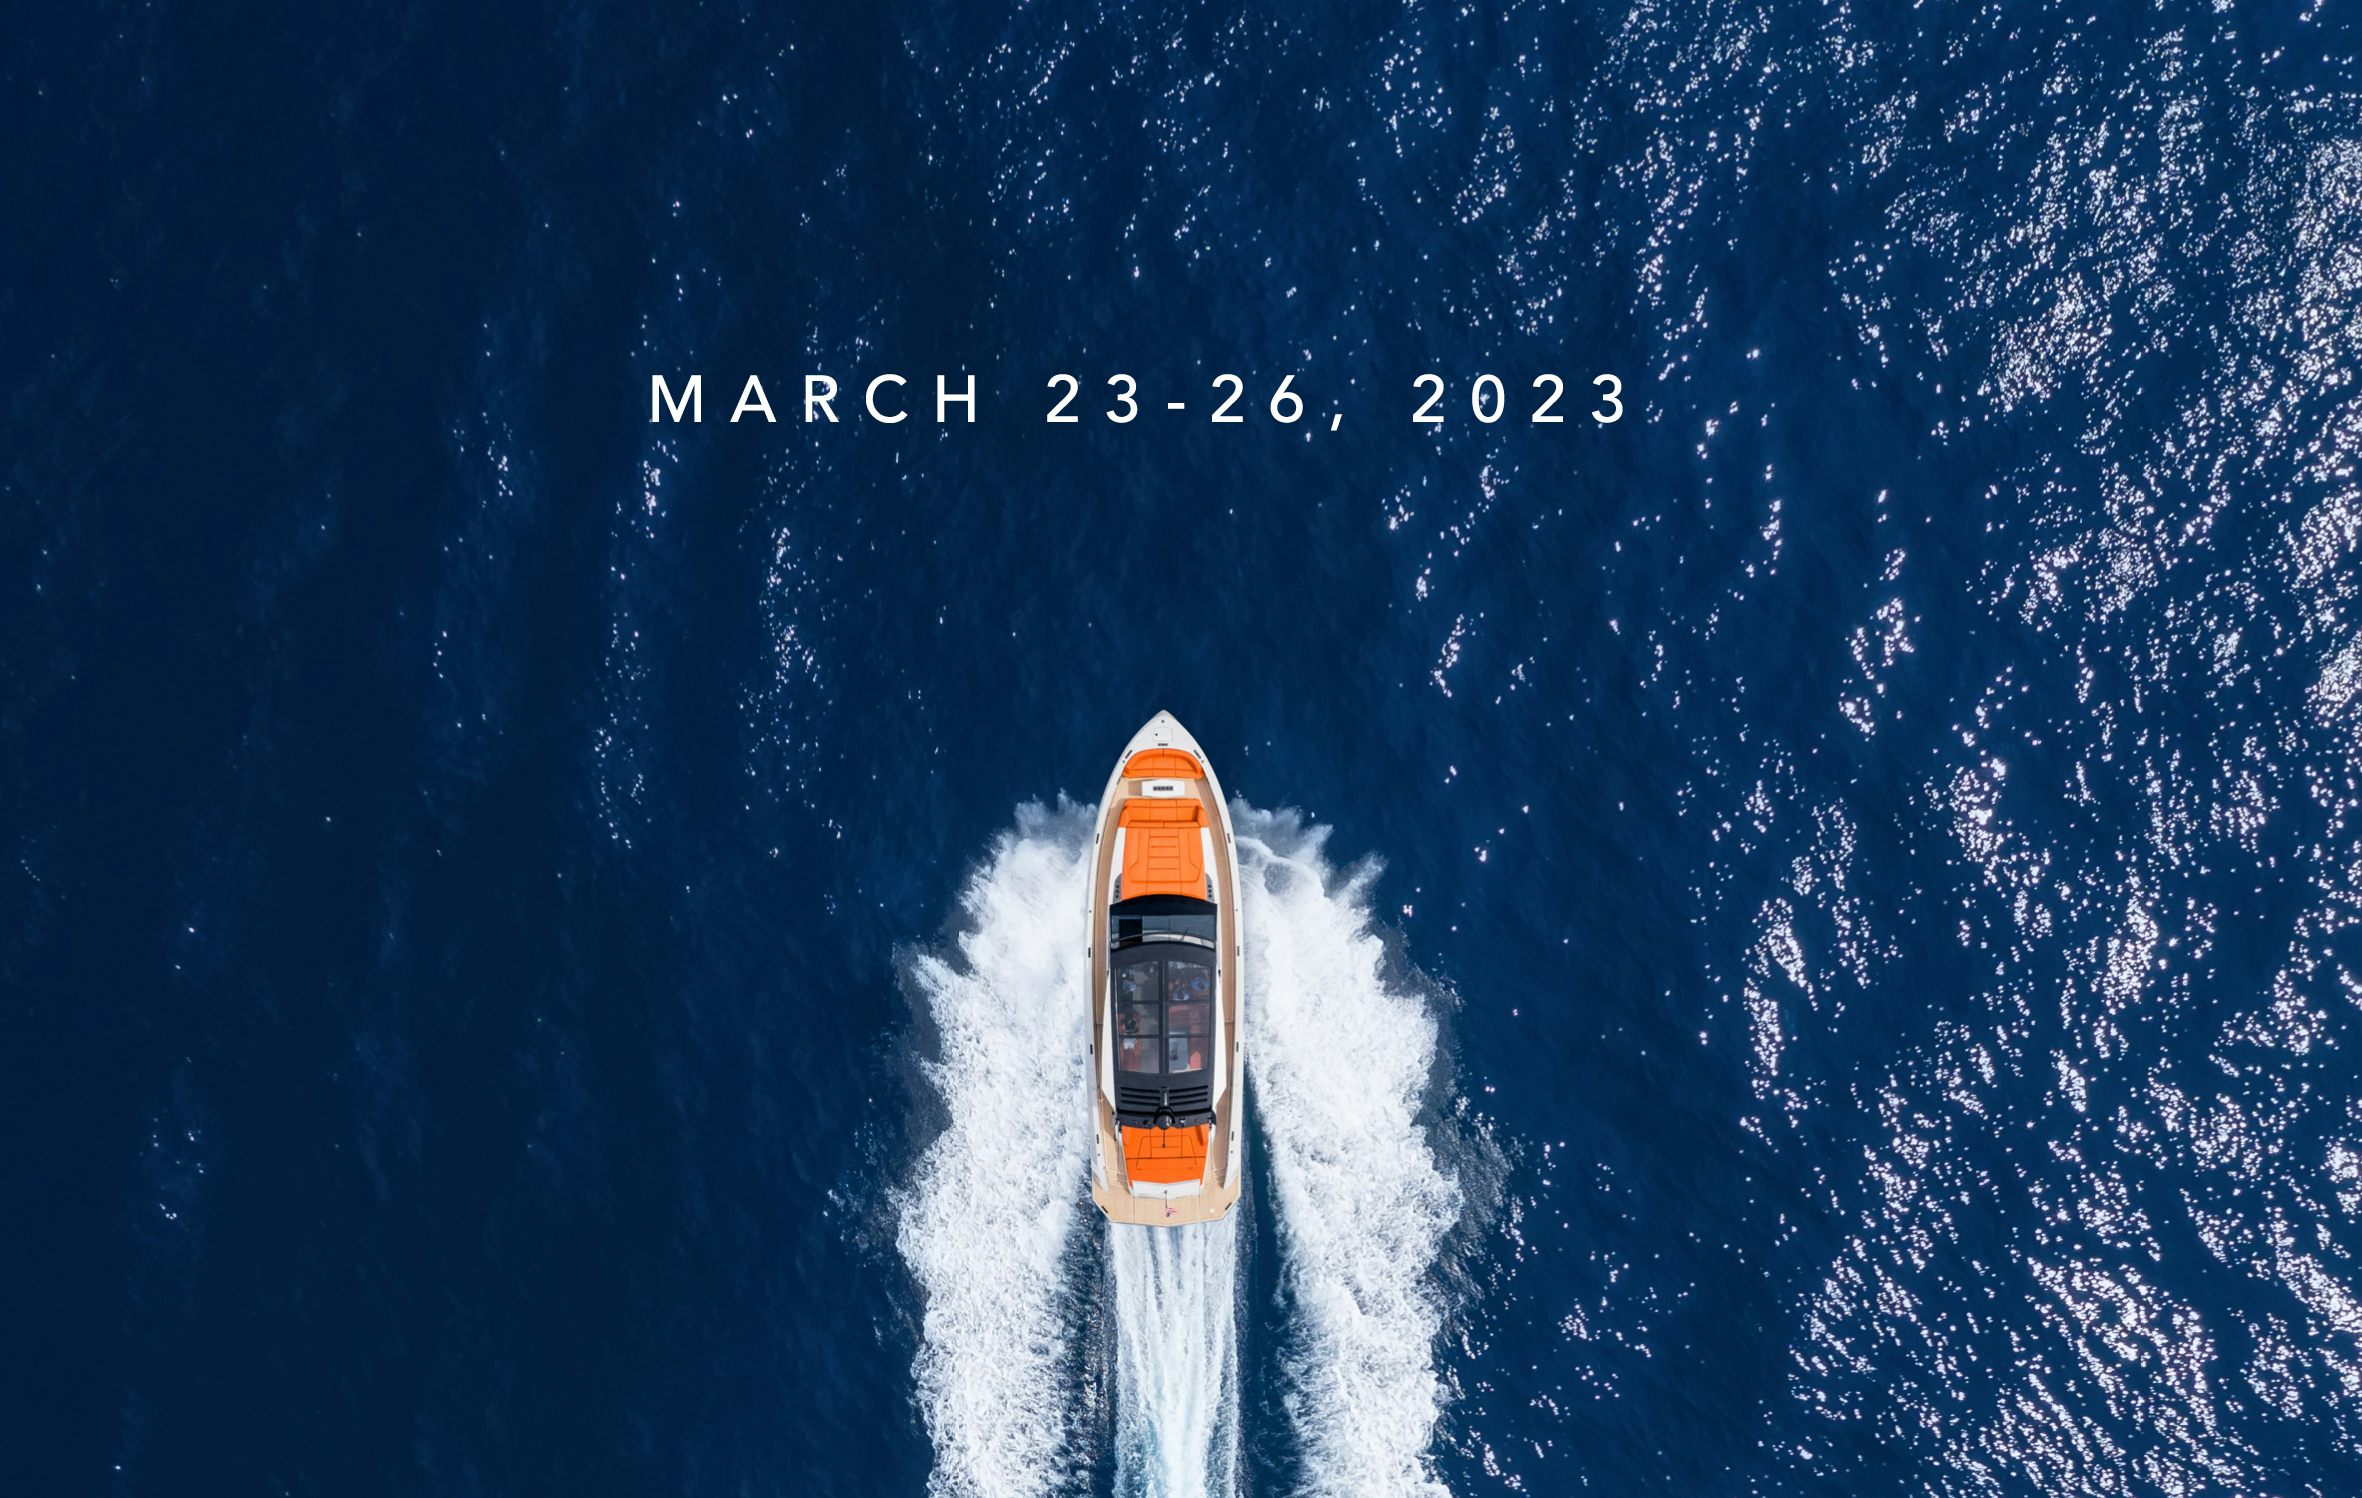 Welcome at the Palm Beach International Boat Show 2023